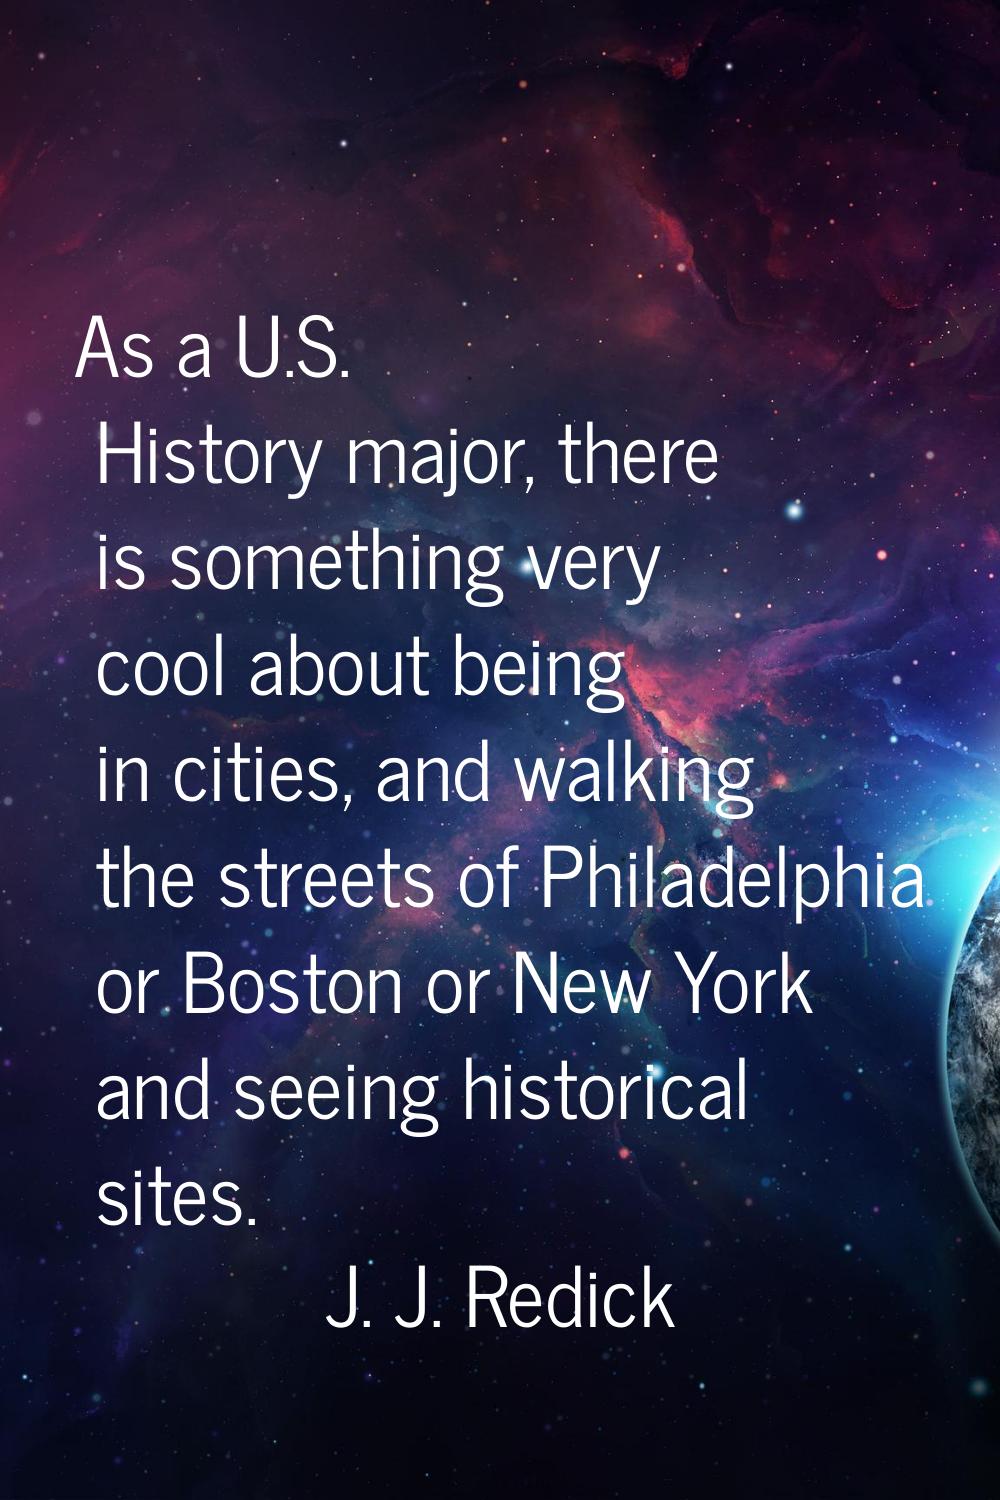 As a U.S. History major, there is something very cool about being in cities, and walking the street